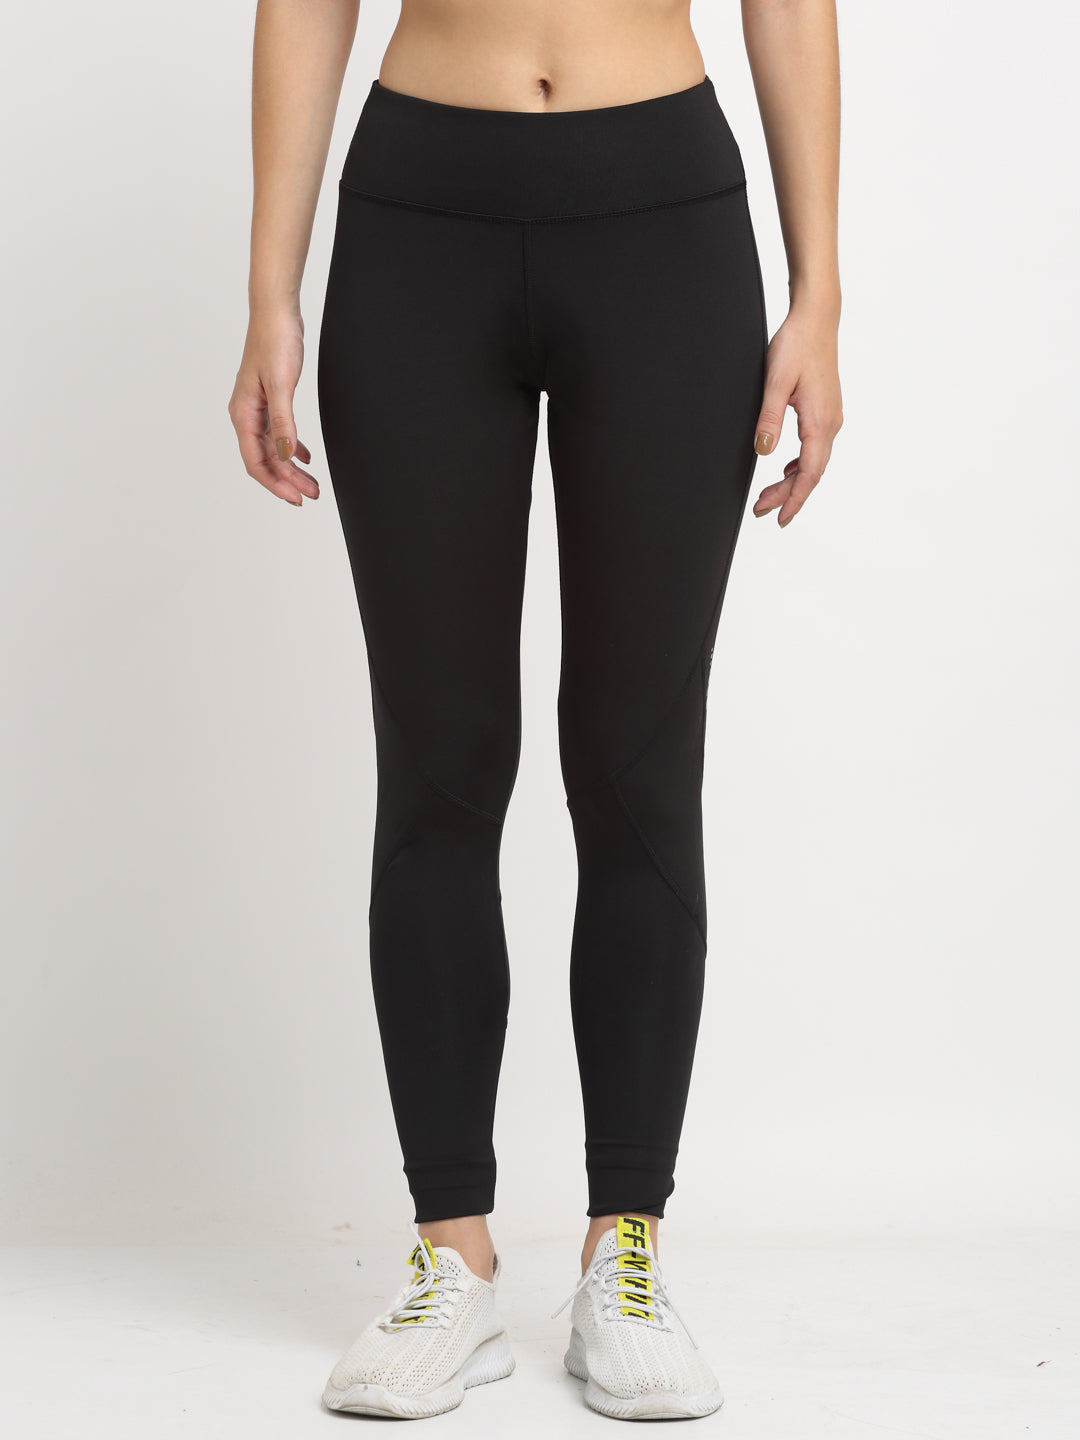 High-Quality Sports Leggings for Maximum Comfort and All Day Style –  Fearless Sports